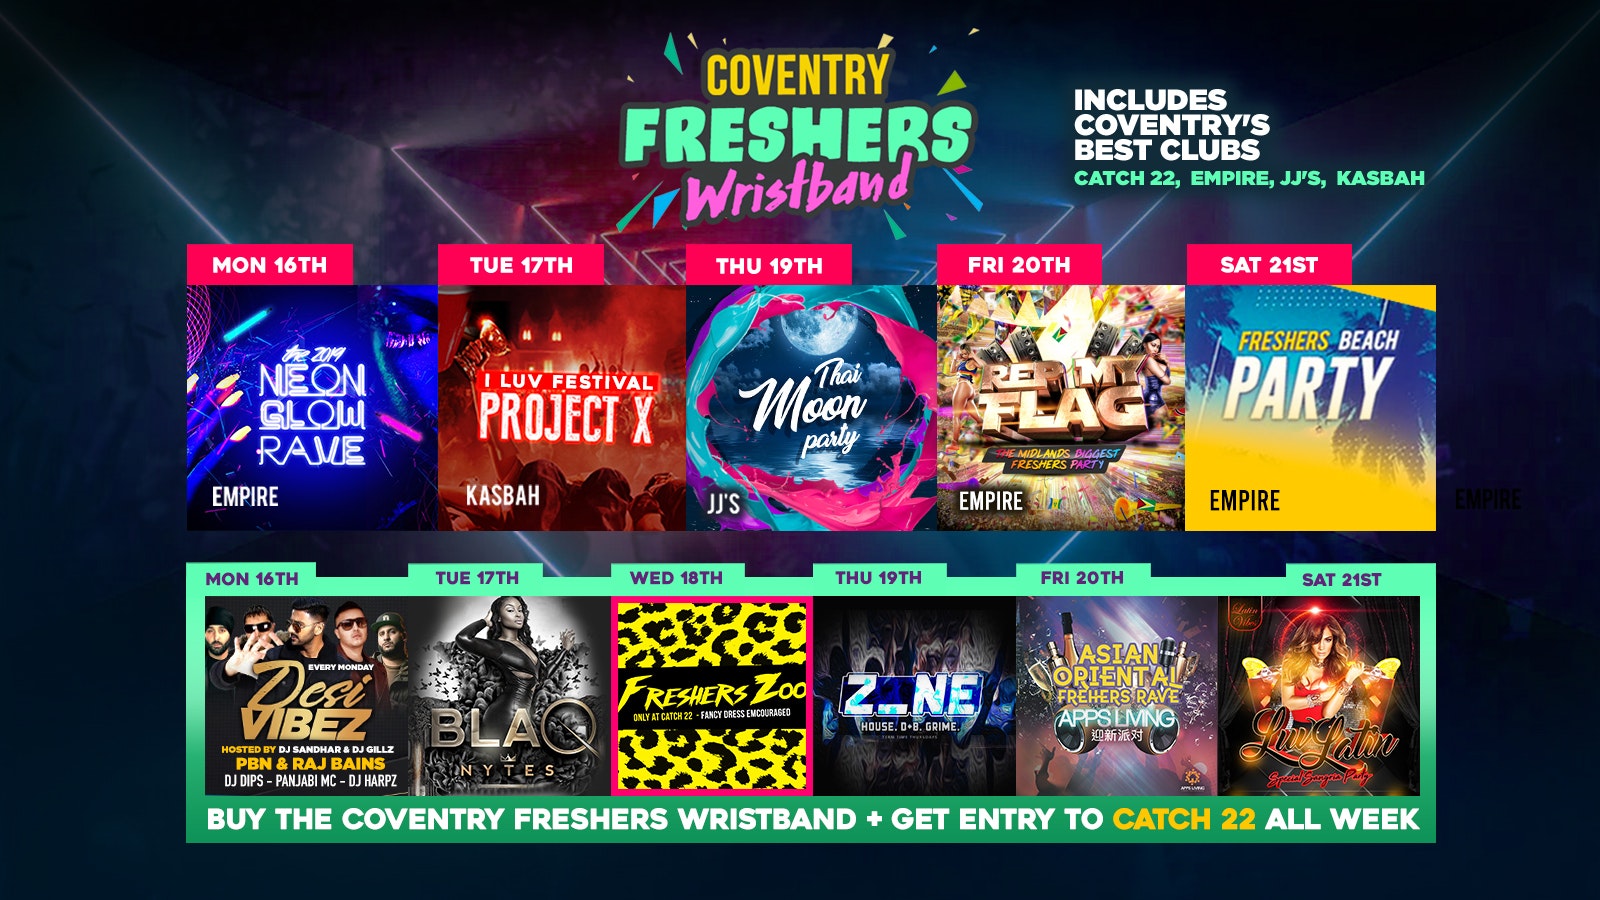 COVENTRY FRESHERS WRISTBAND 2019 / 12 Events, 1 Pass – Last Few Wristbands!